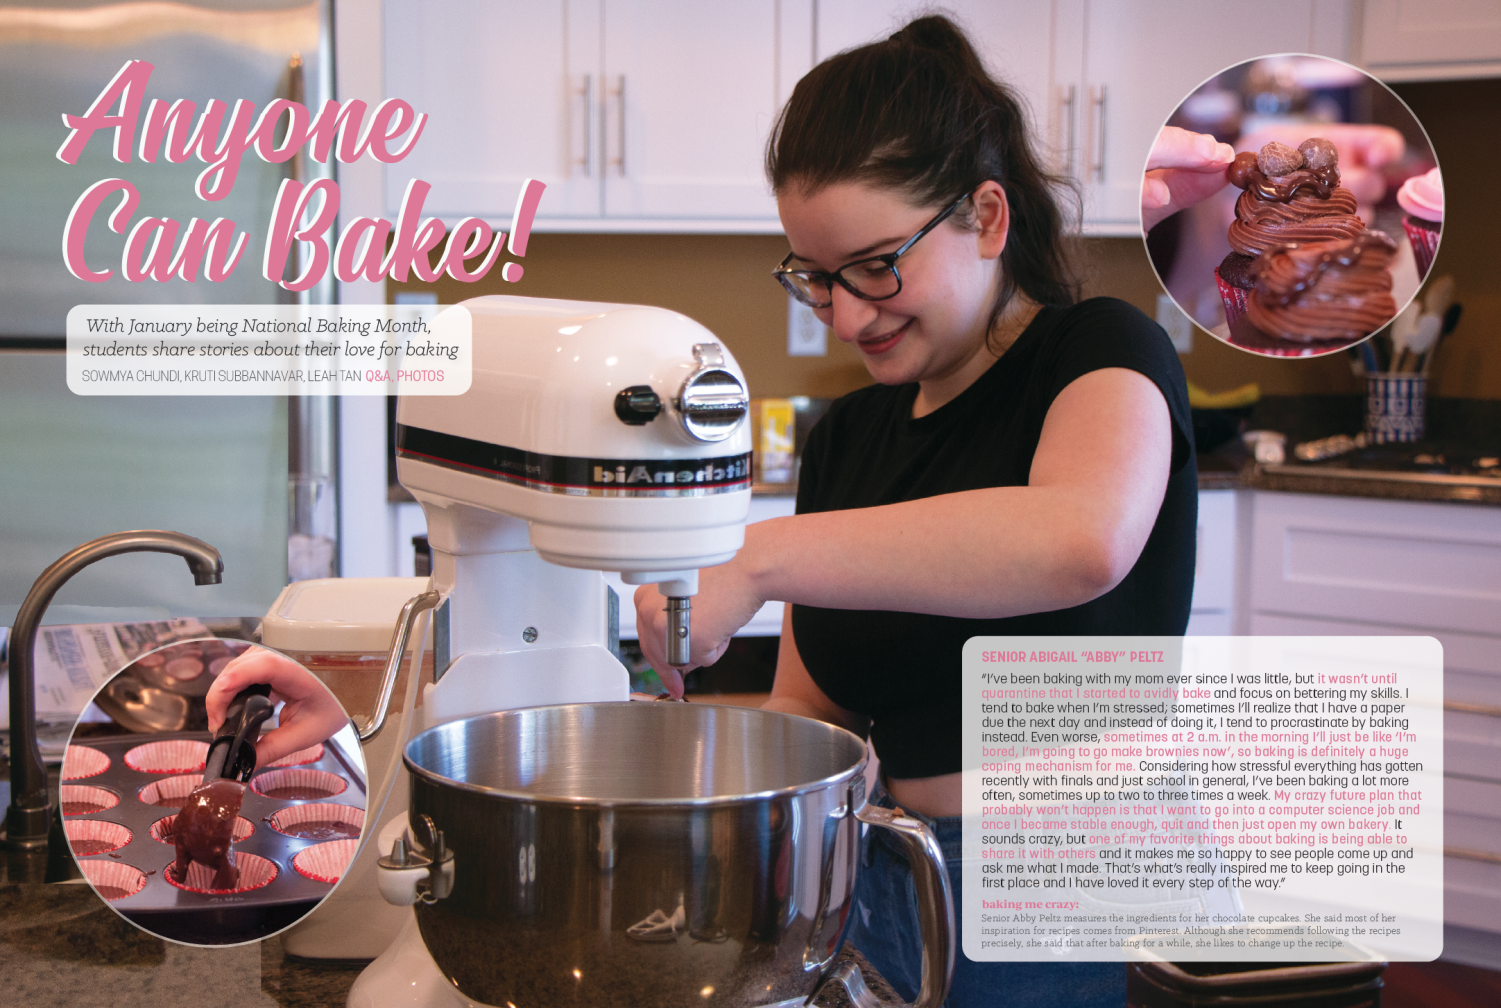 With January being National Baking Month, students share stories about their love for baking